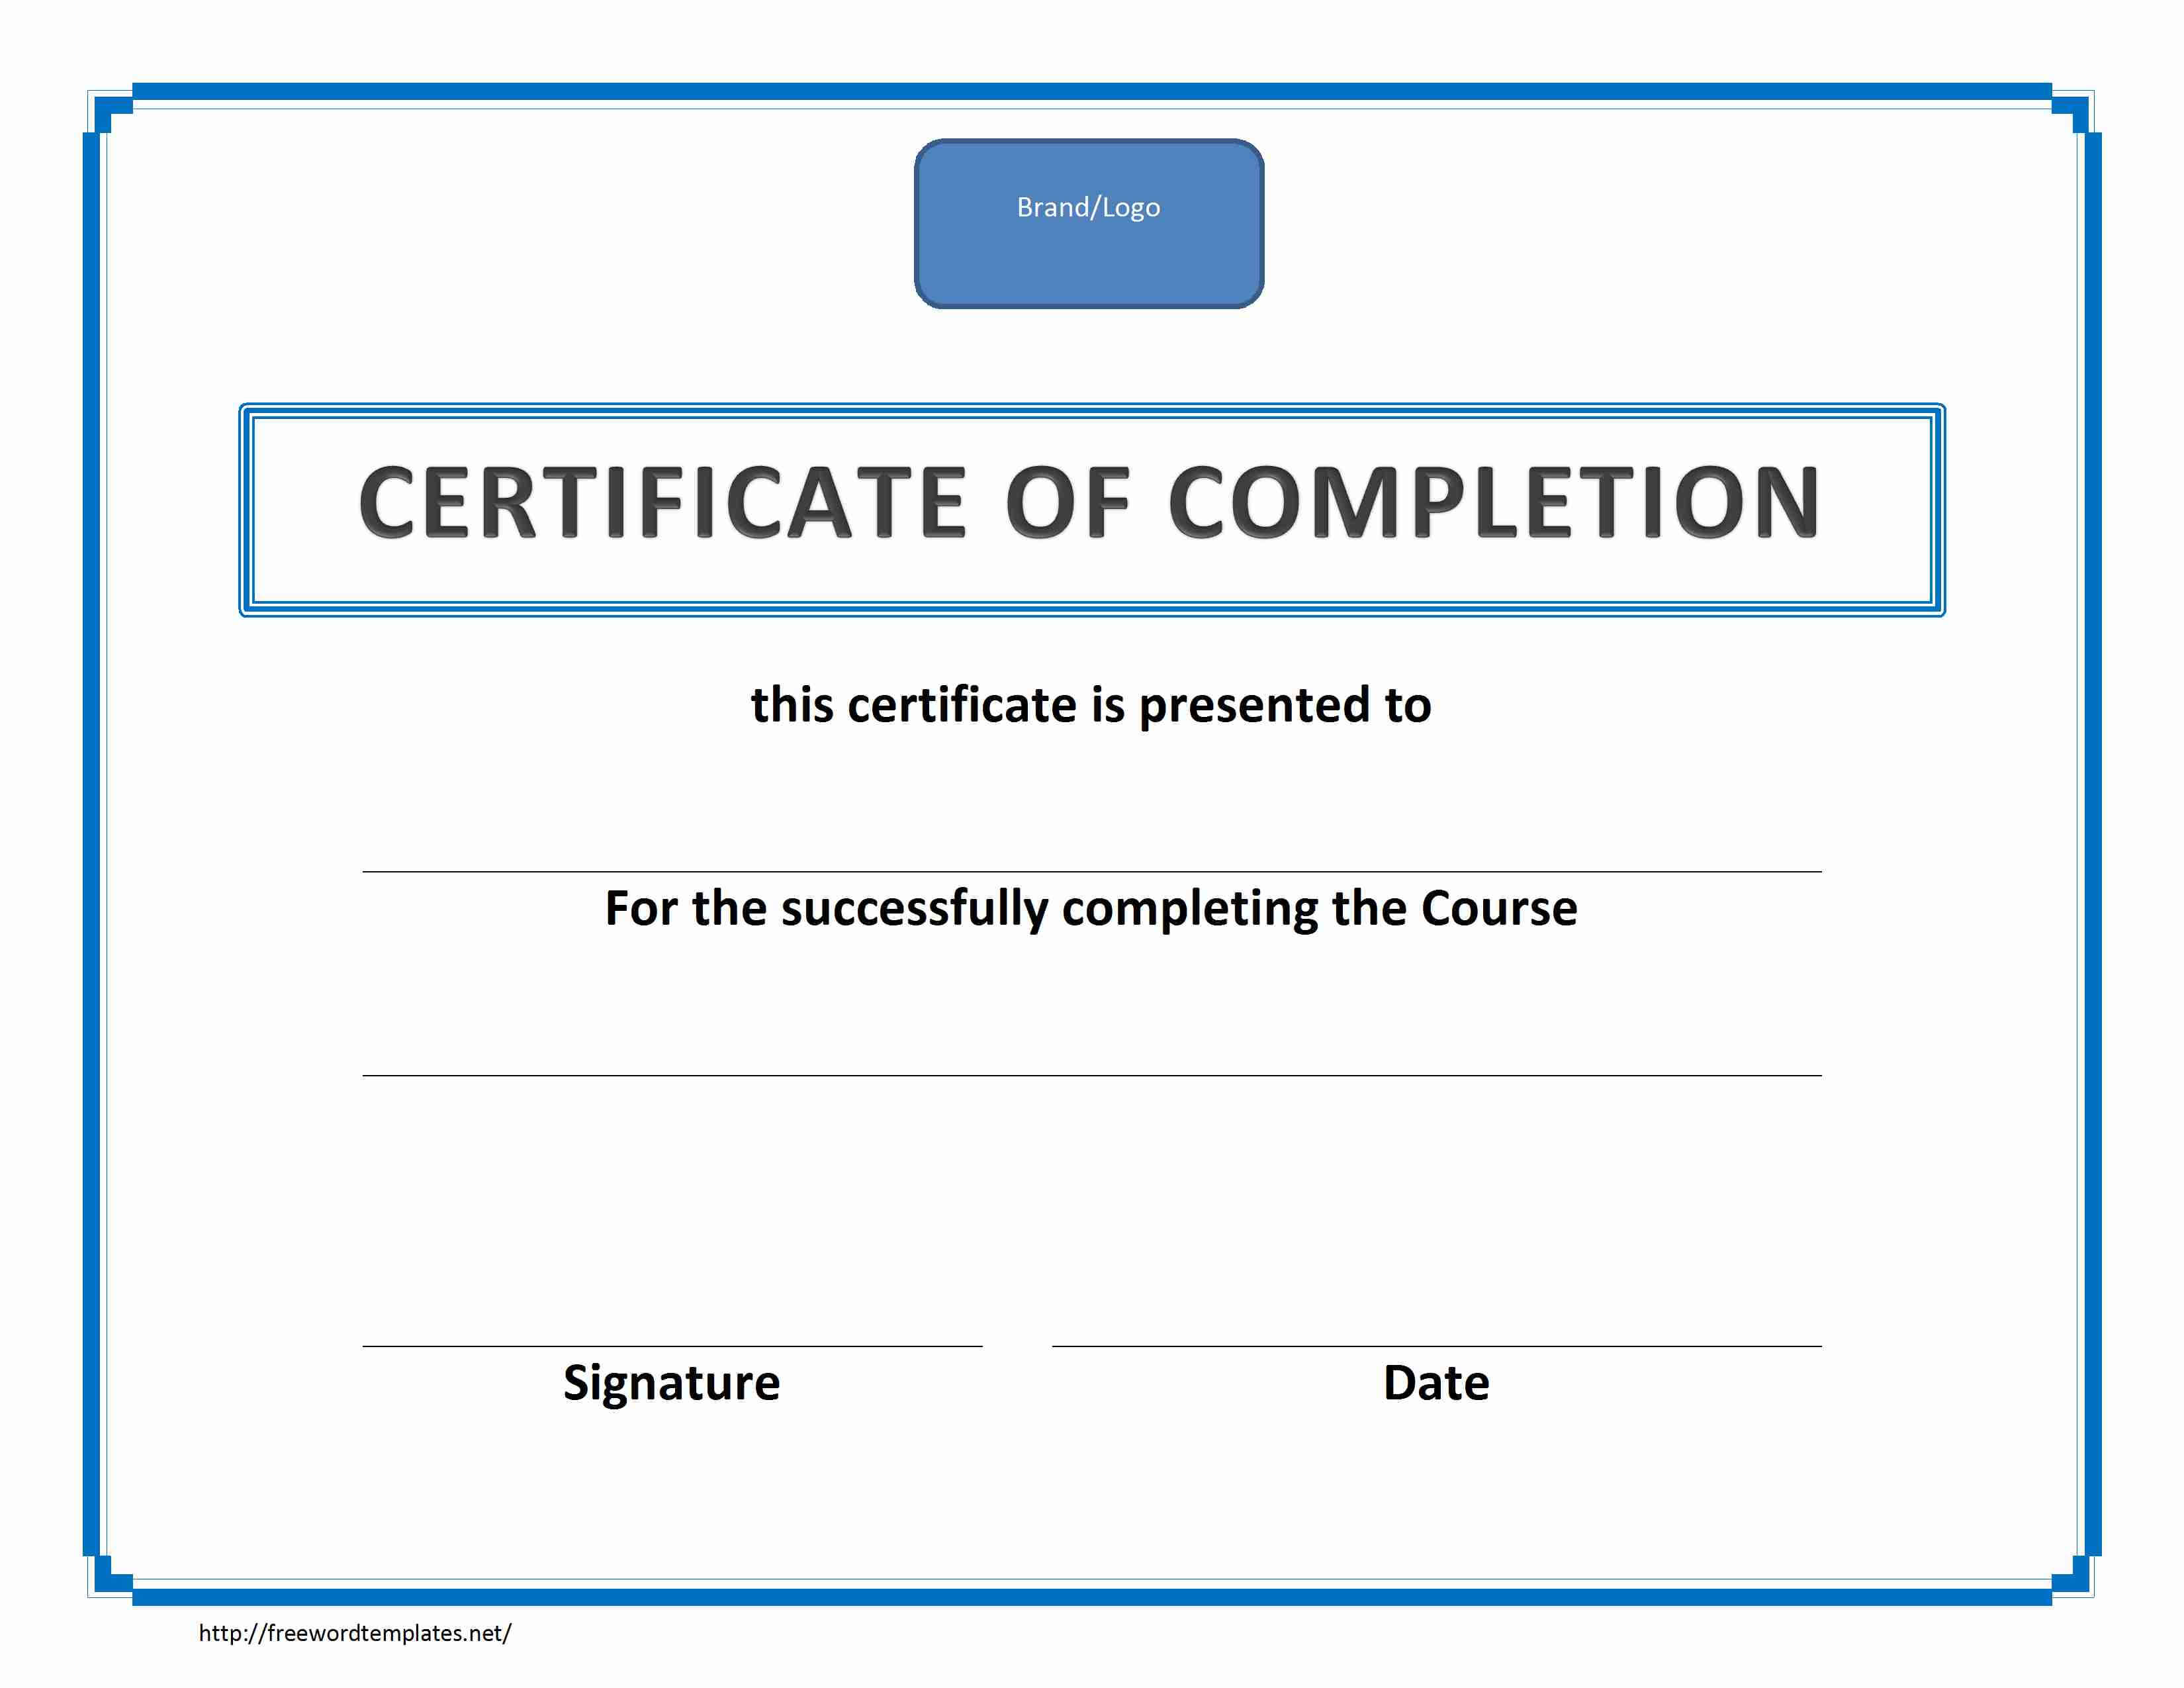 Training Certificate Of Completion In Certificate Of Completion Word Template